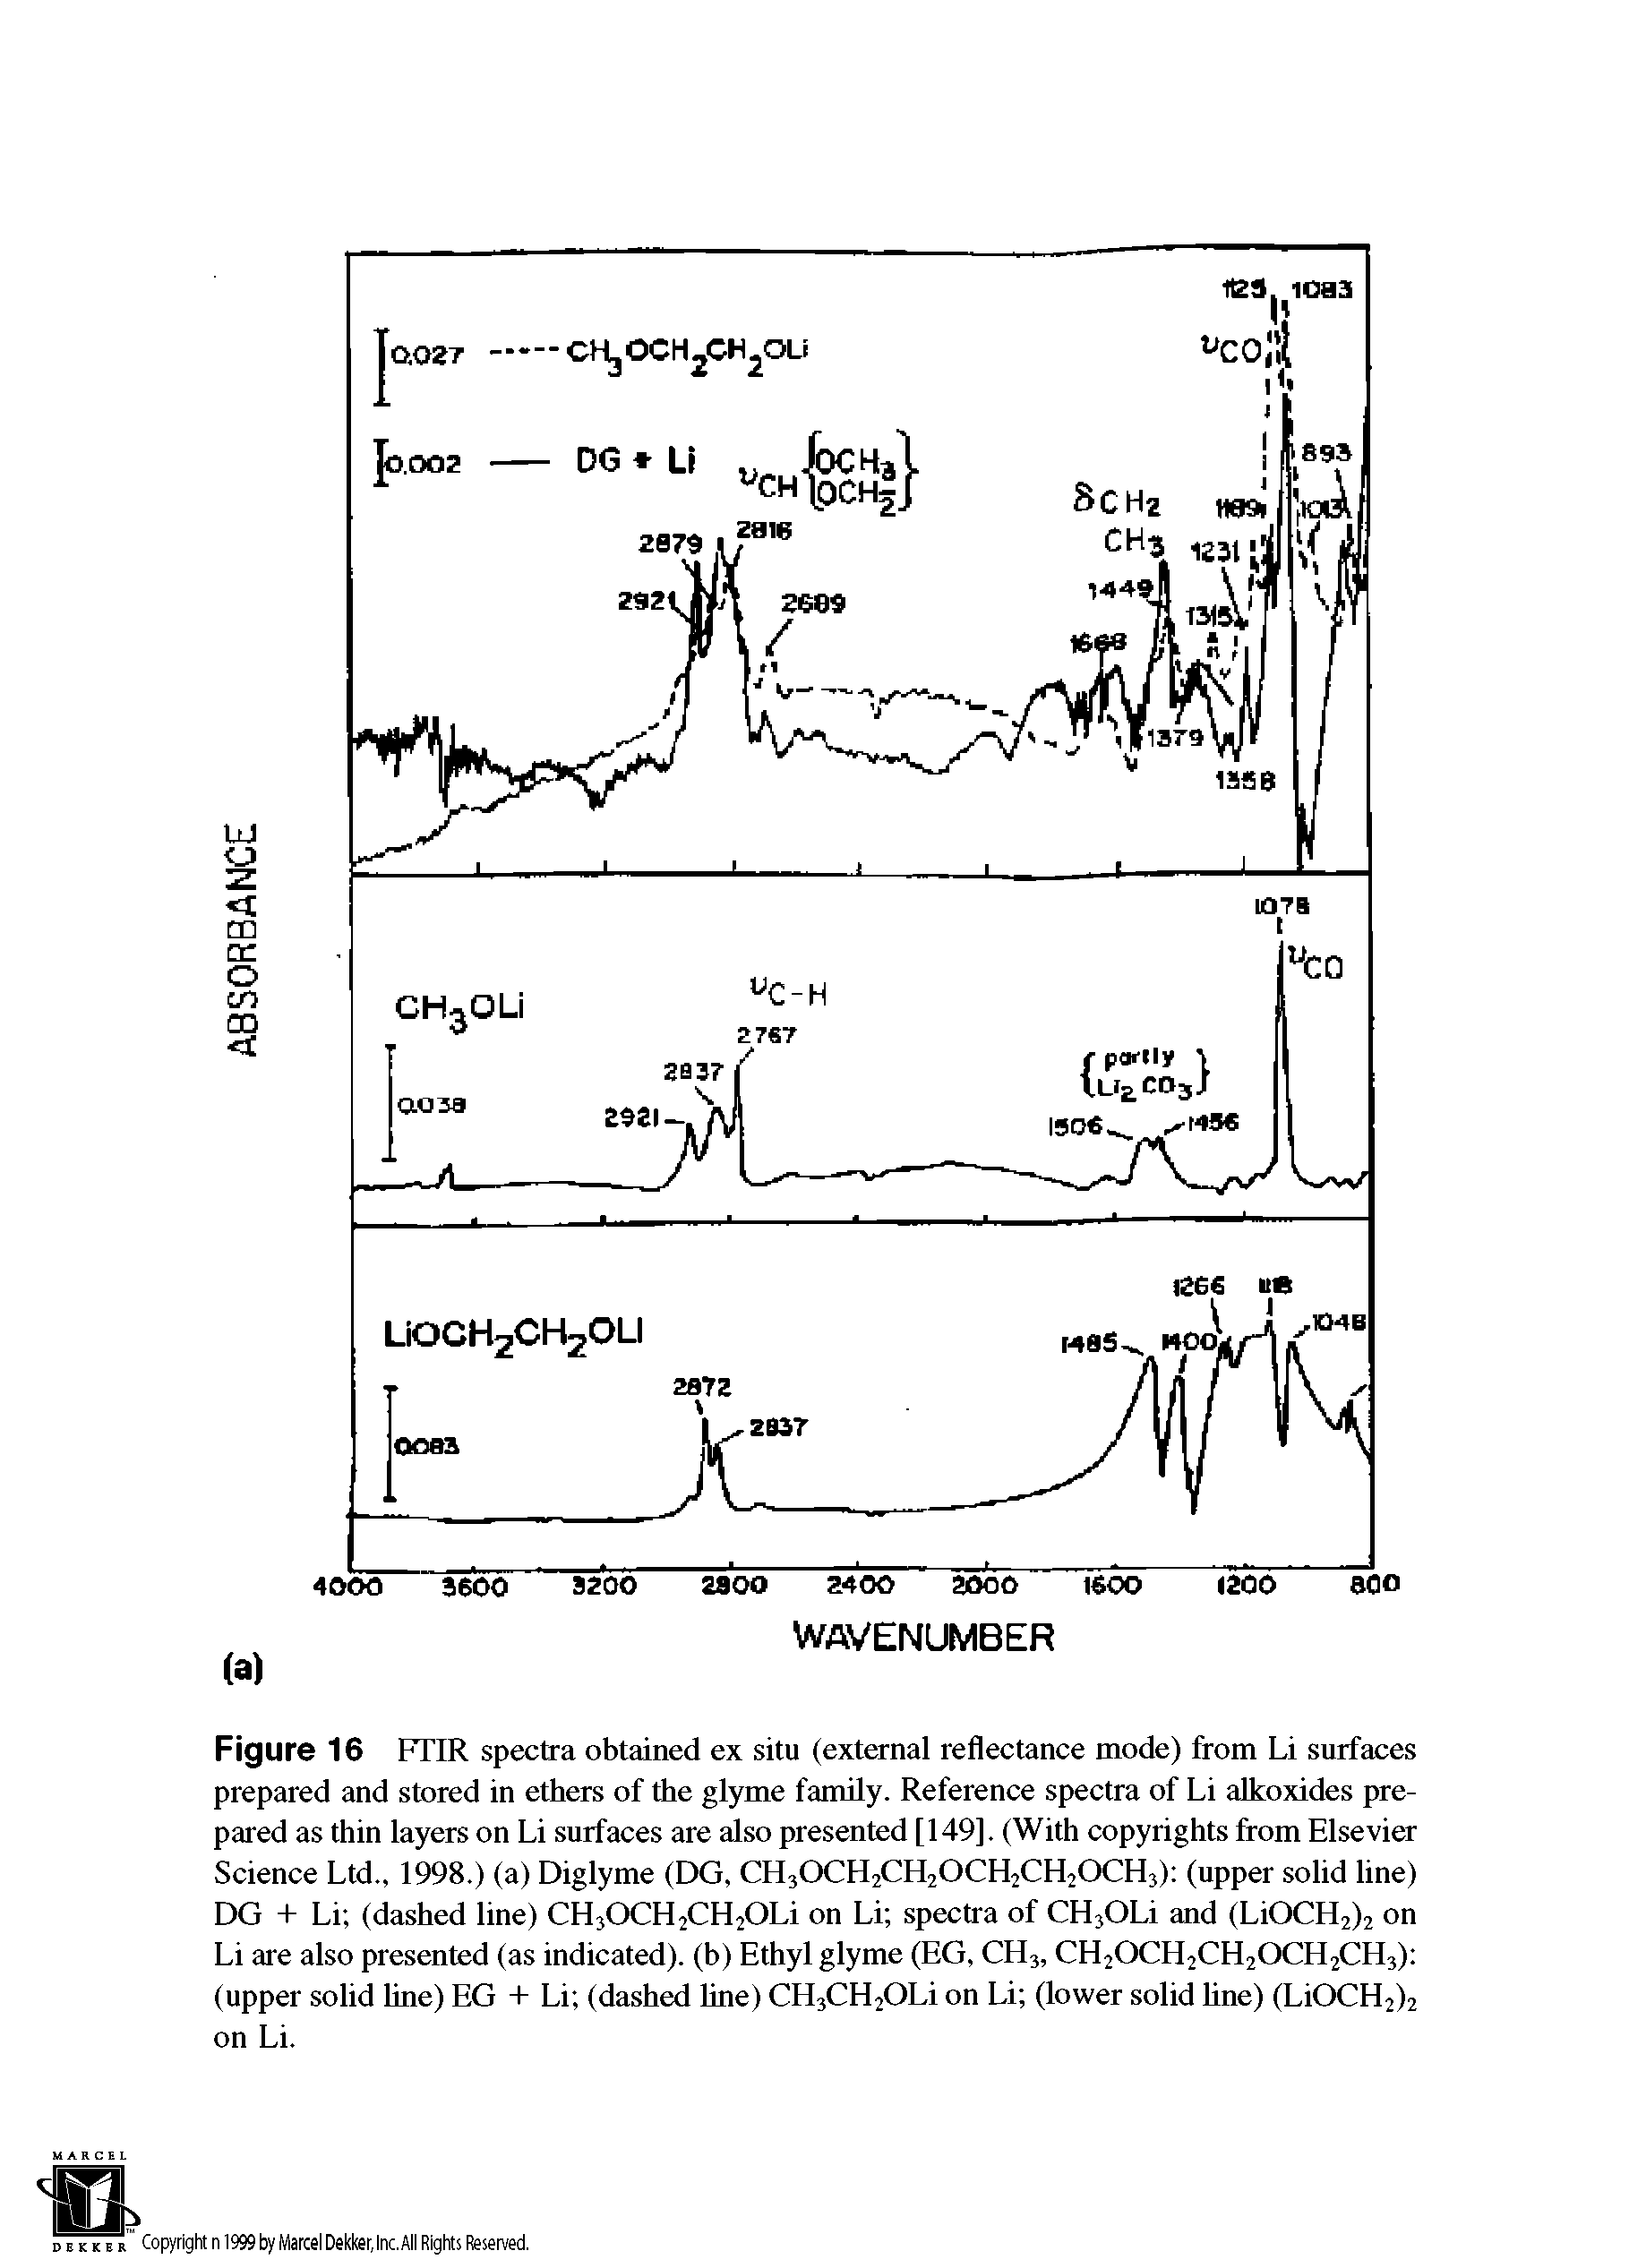 Figure 16 FTIR spectra obtained ex situ (external reflectance mode) from Li surfaces prepared and stored in ethers of the glyme family. Reference spectra of Li alkoxides prepared as thin layers on Li surfaces are also presented [149]. (With copyrights from Elsevier Science Ltd., 1998.) (a) Diglyme (DG, CH3OCH2CH2OCH2CH2OCH3) (upper solid line) DG + Li (dashed line) CE OCE CE OLi on Li spectra of CH3OLi and (LiOCH2)2 on Li are also presented (as indicated), (b) Ethyl glyme (EG, CH3, CH2OCH2CH2OCH2CH3) (upper solid line) EG + Li (dashed line) CHjCE OLi on Li (lower solid line) (LiOCH2)2 on Li.